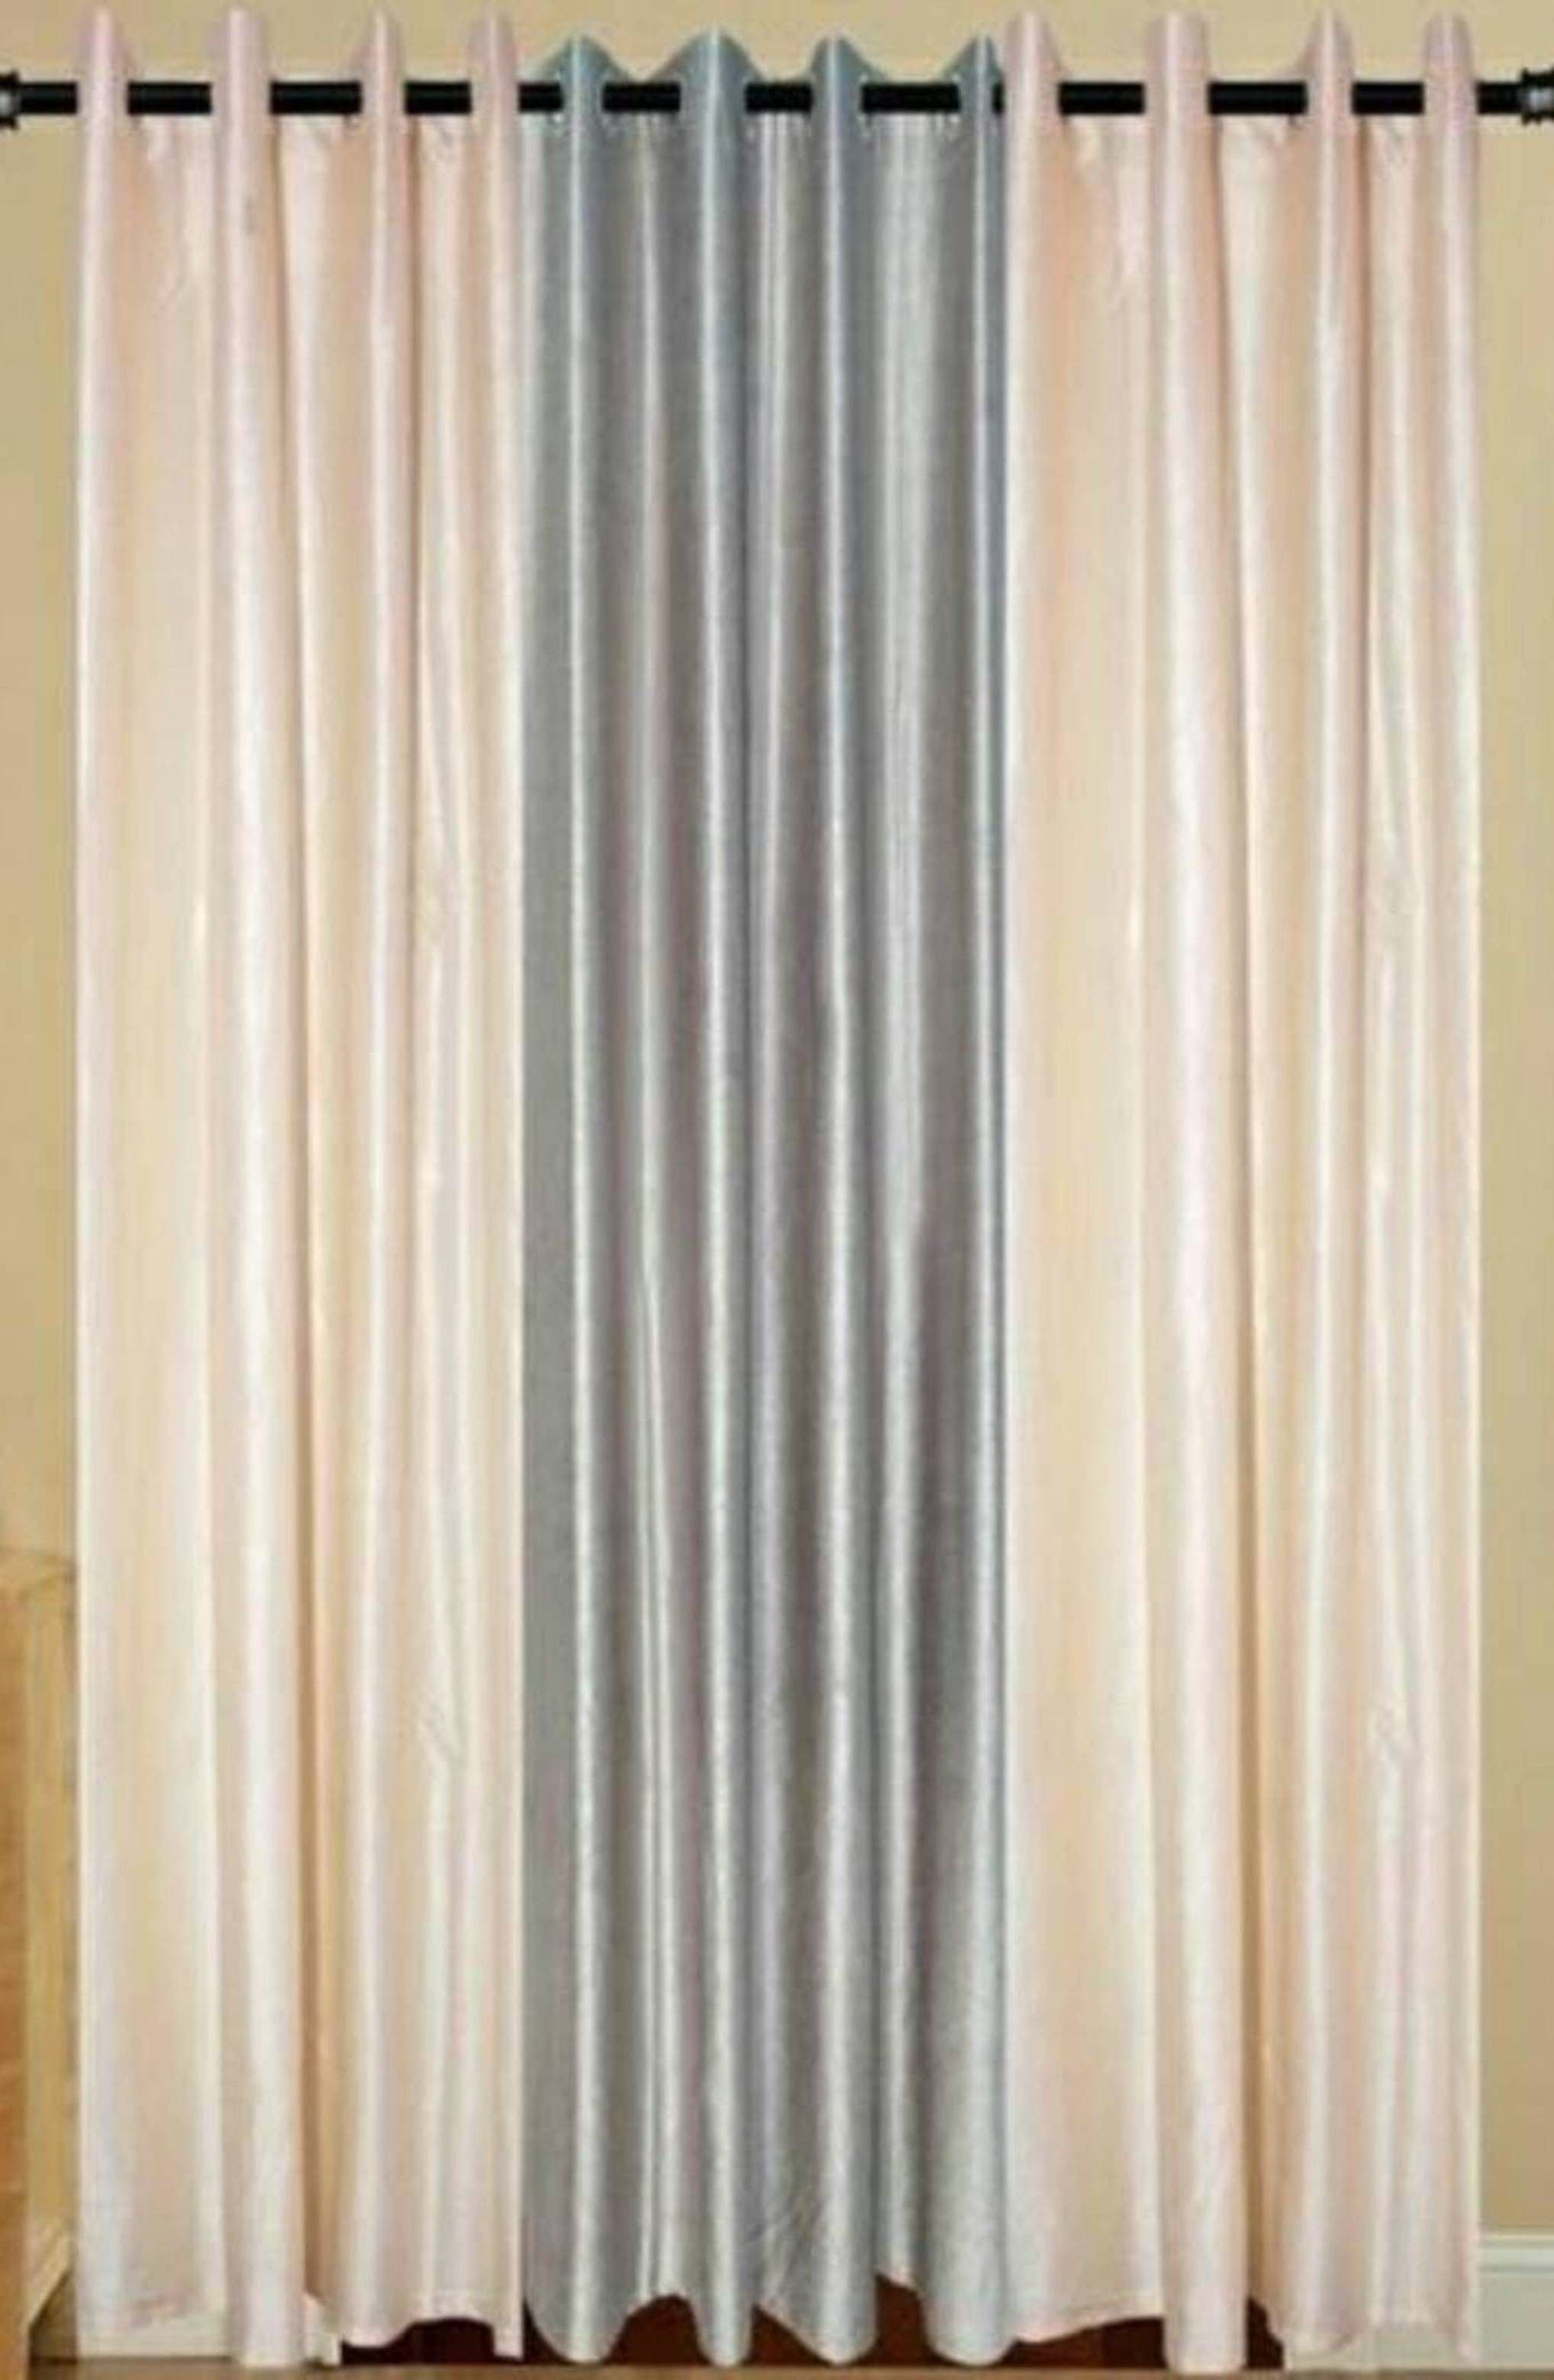     			HOMETALES Solid Semi-Transparent Eyelet Curtain 5 ft ( Pack of 3 ) - Multicolor